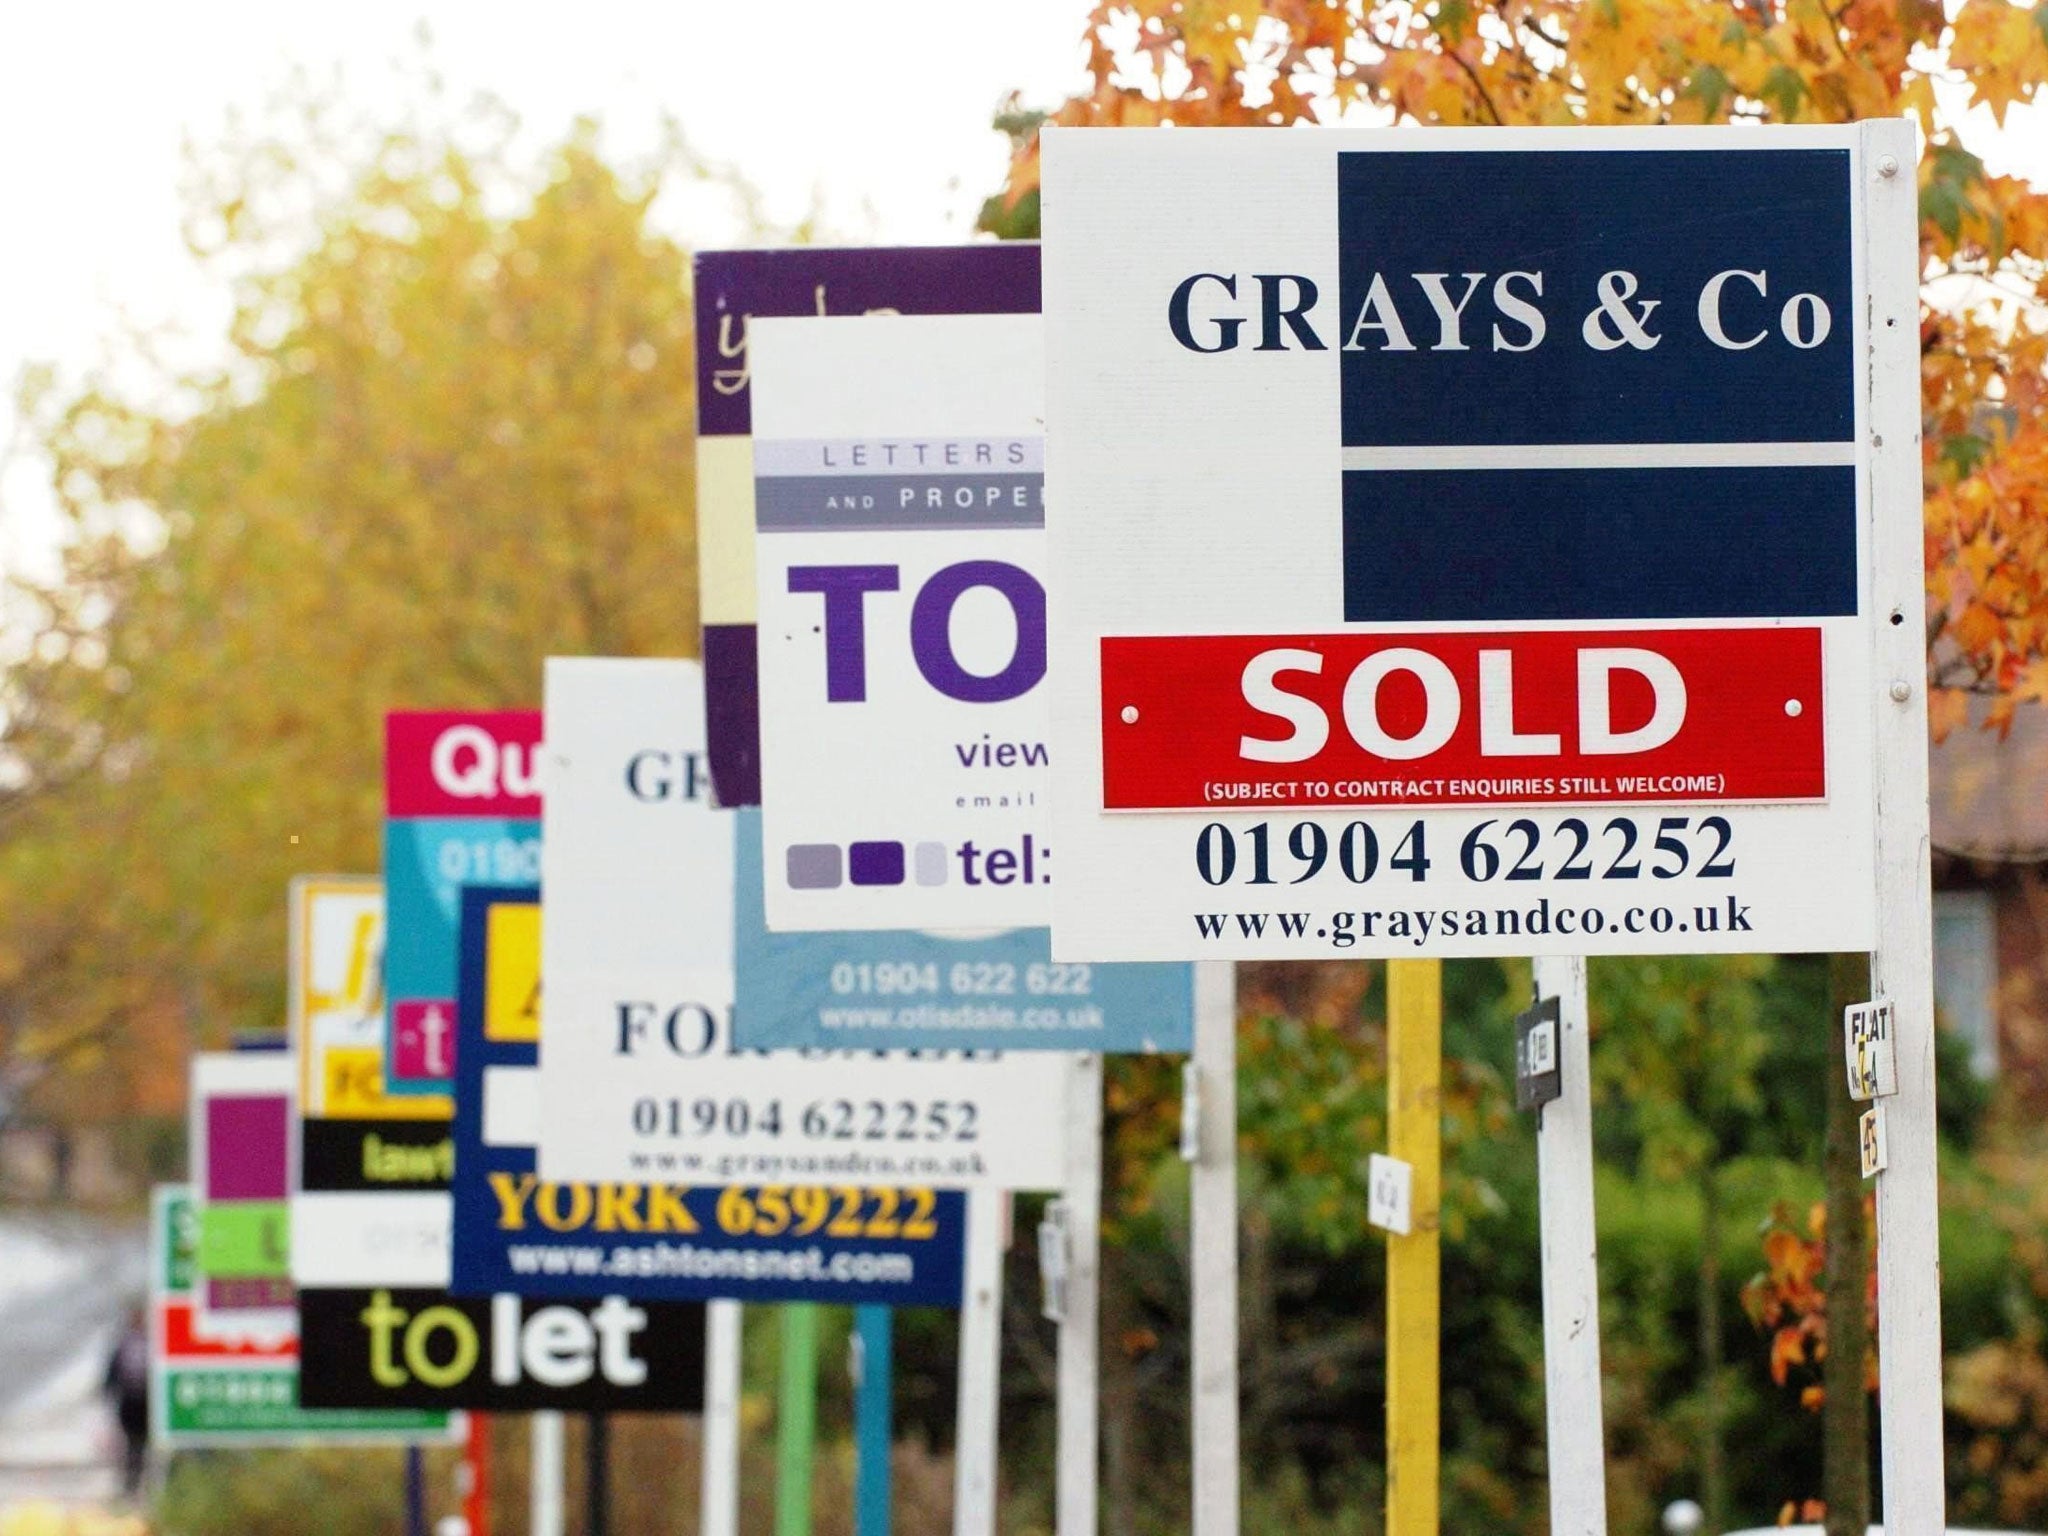 Britain's house prices are rising at their fastest pace in more than three years